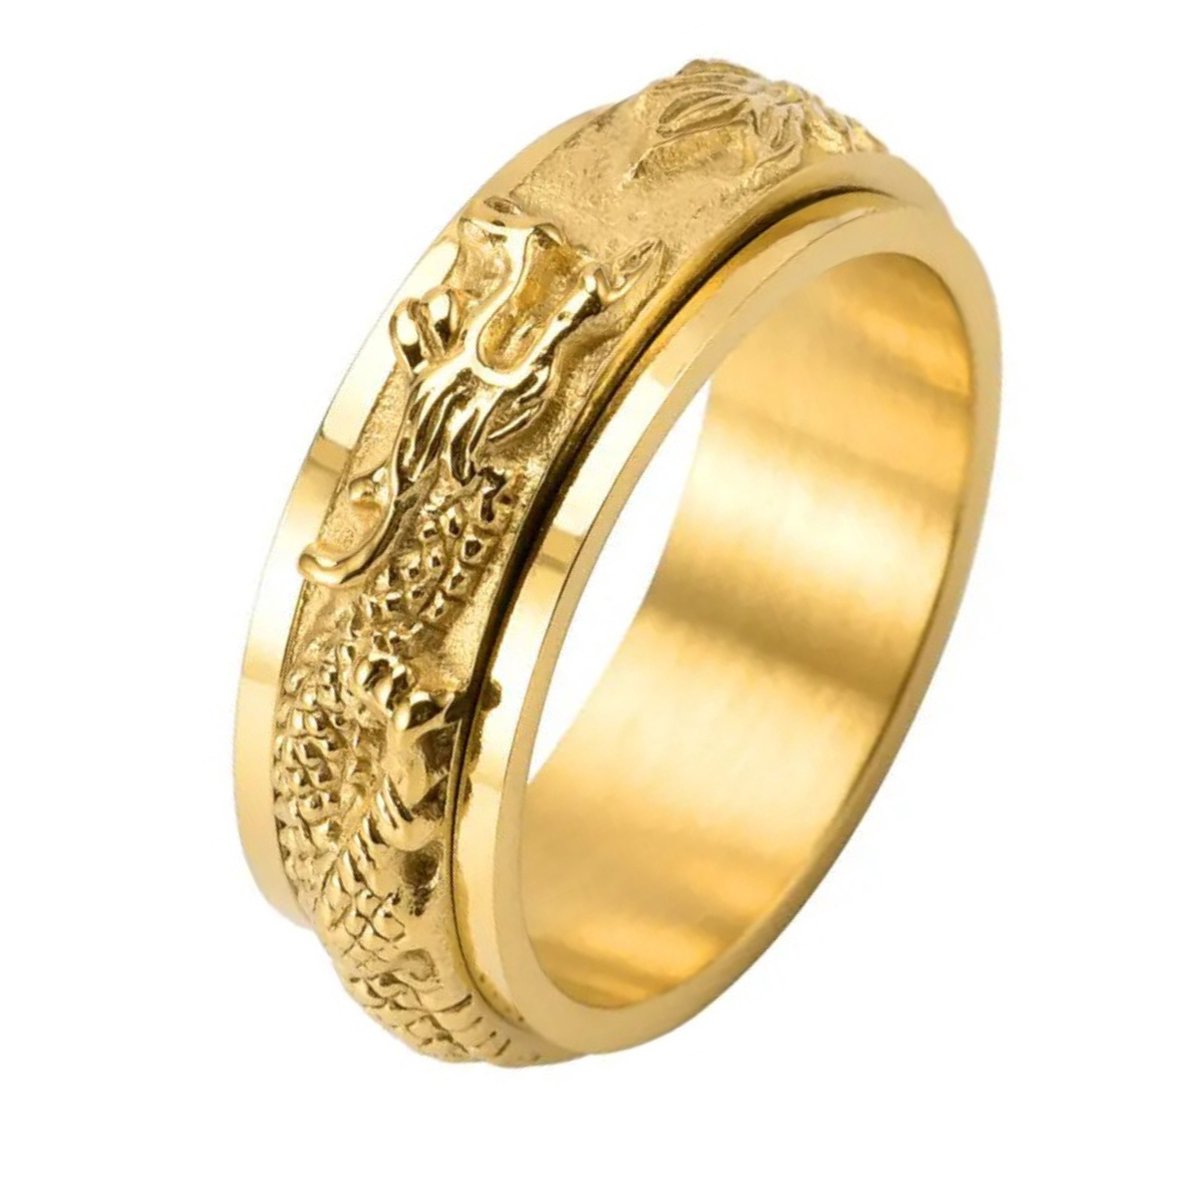 Anxiety Ring - (Draak) - Stress Ring - Fidget Ring - Anxiety Ring For Finger - Draaibare Ring - Spinning Ring - Goud - (20.75 mm / maat 65)